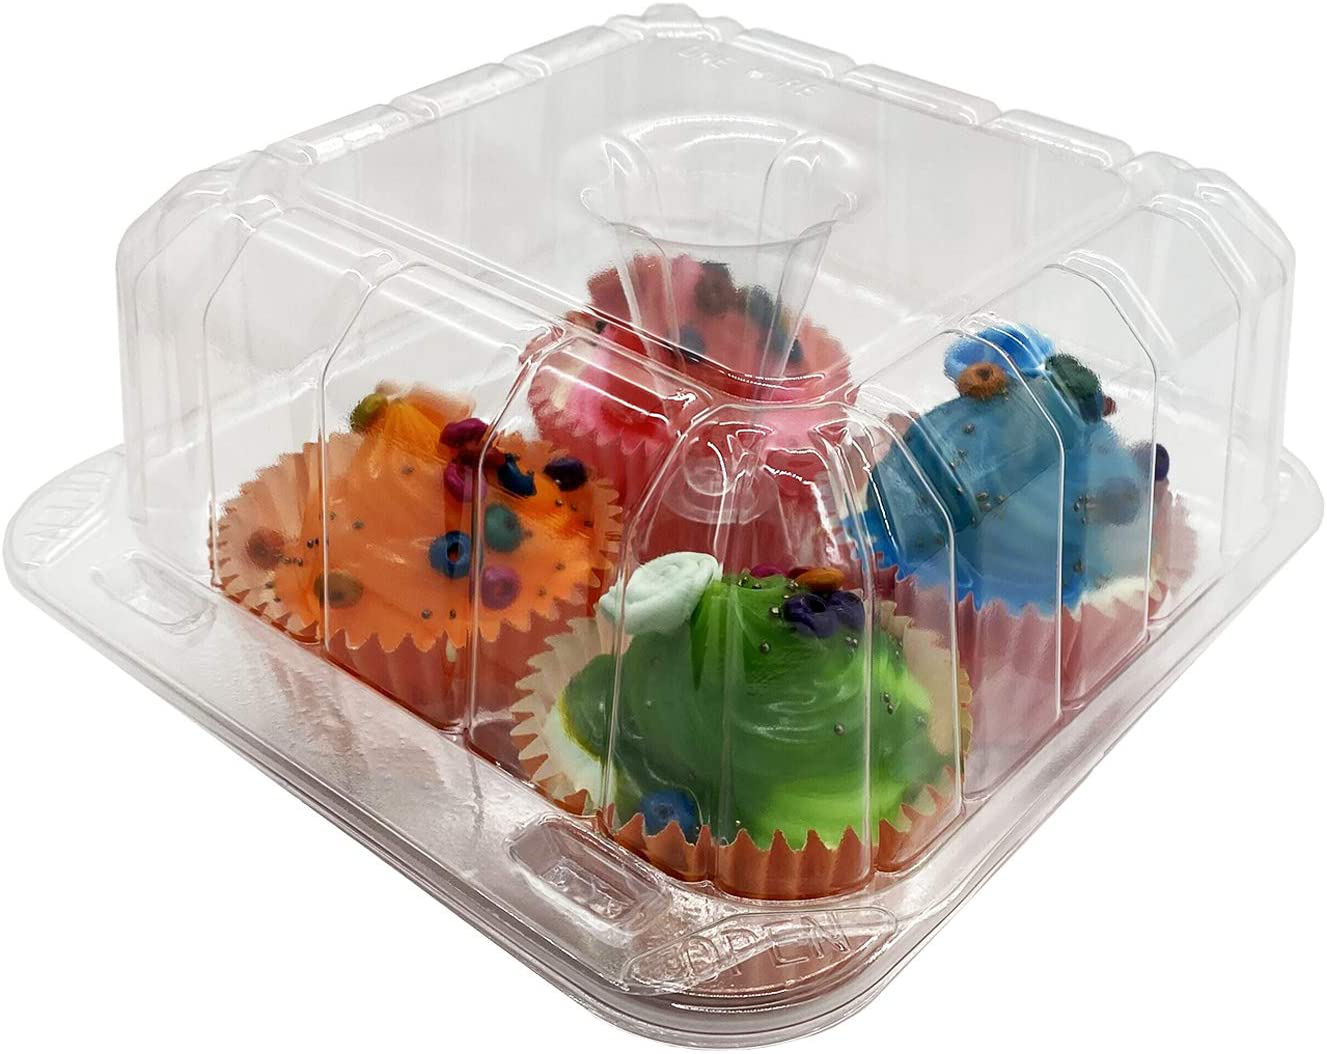 Cupcake Containers Plastic Disposable Clear Plastic Cupcake Muffin Dome Holders Cases